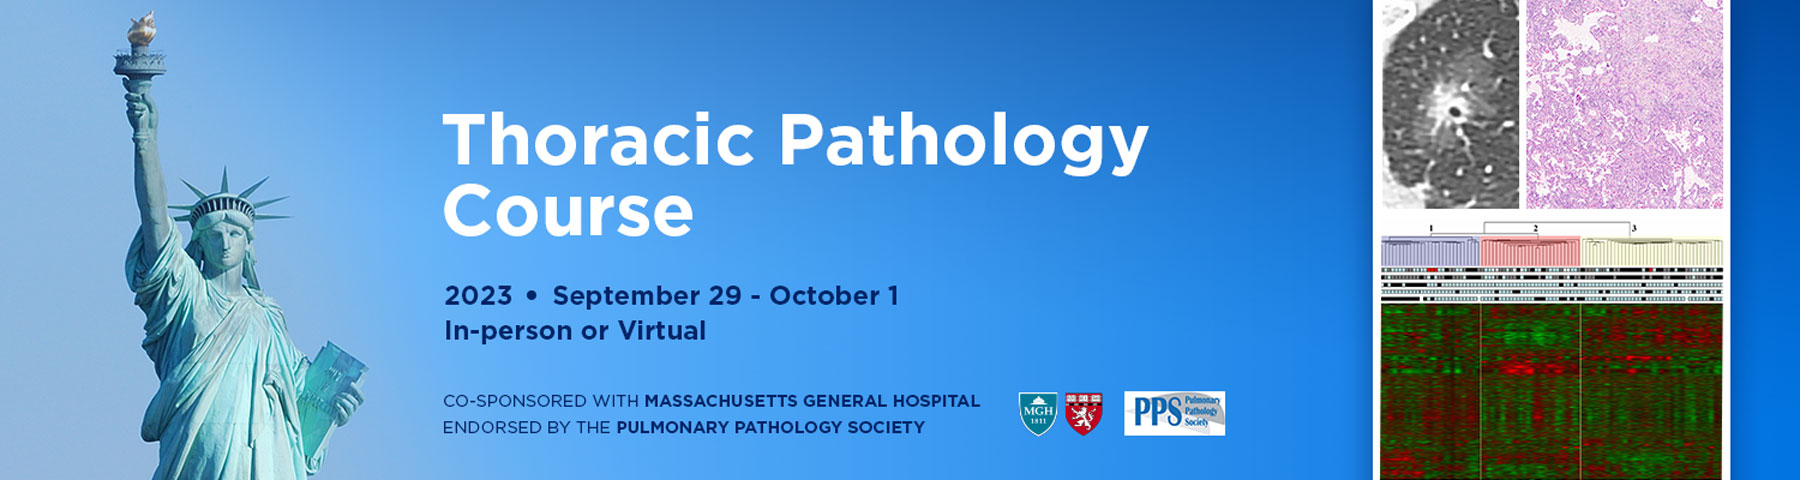 Thoracic Pathology Course 2023 Banner